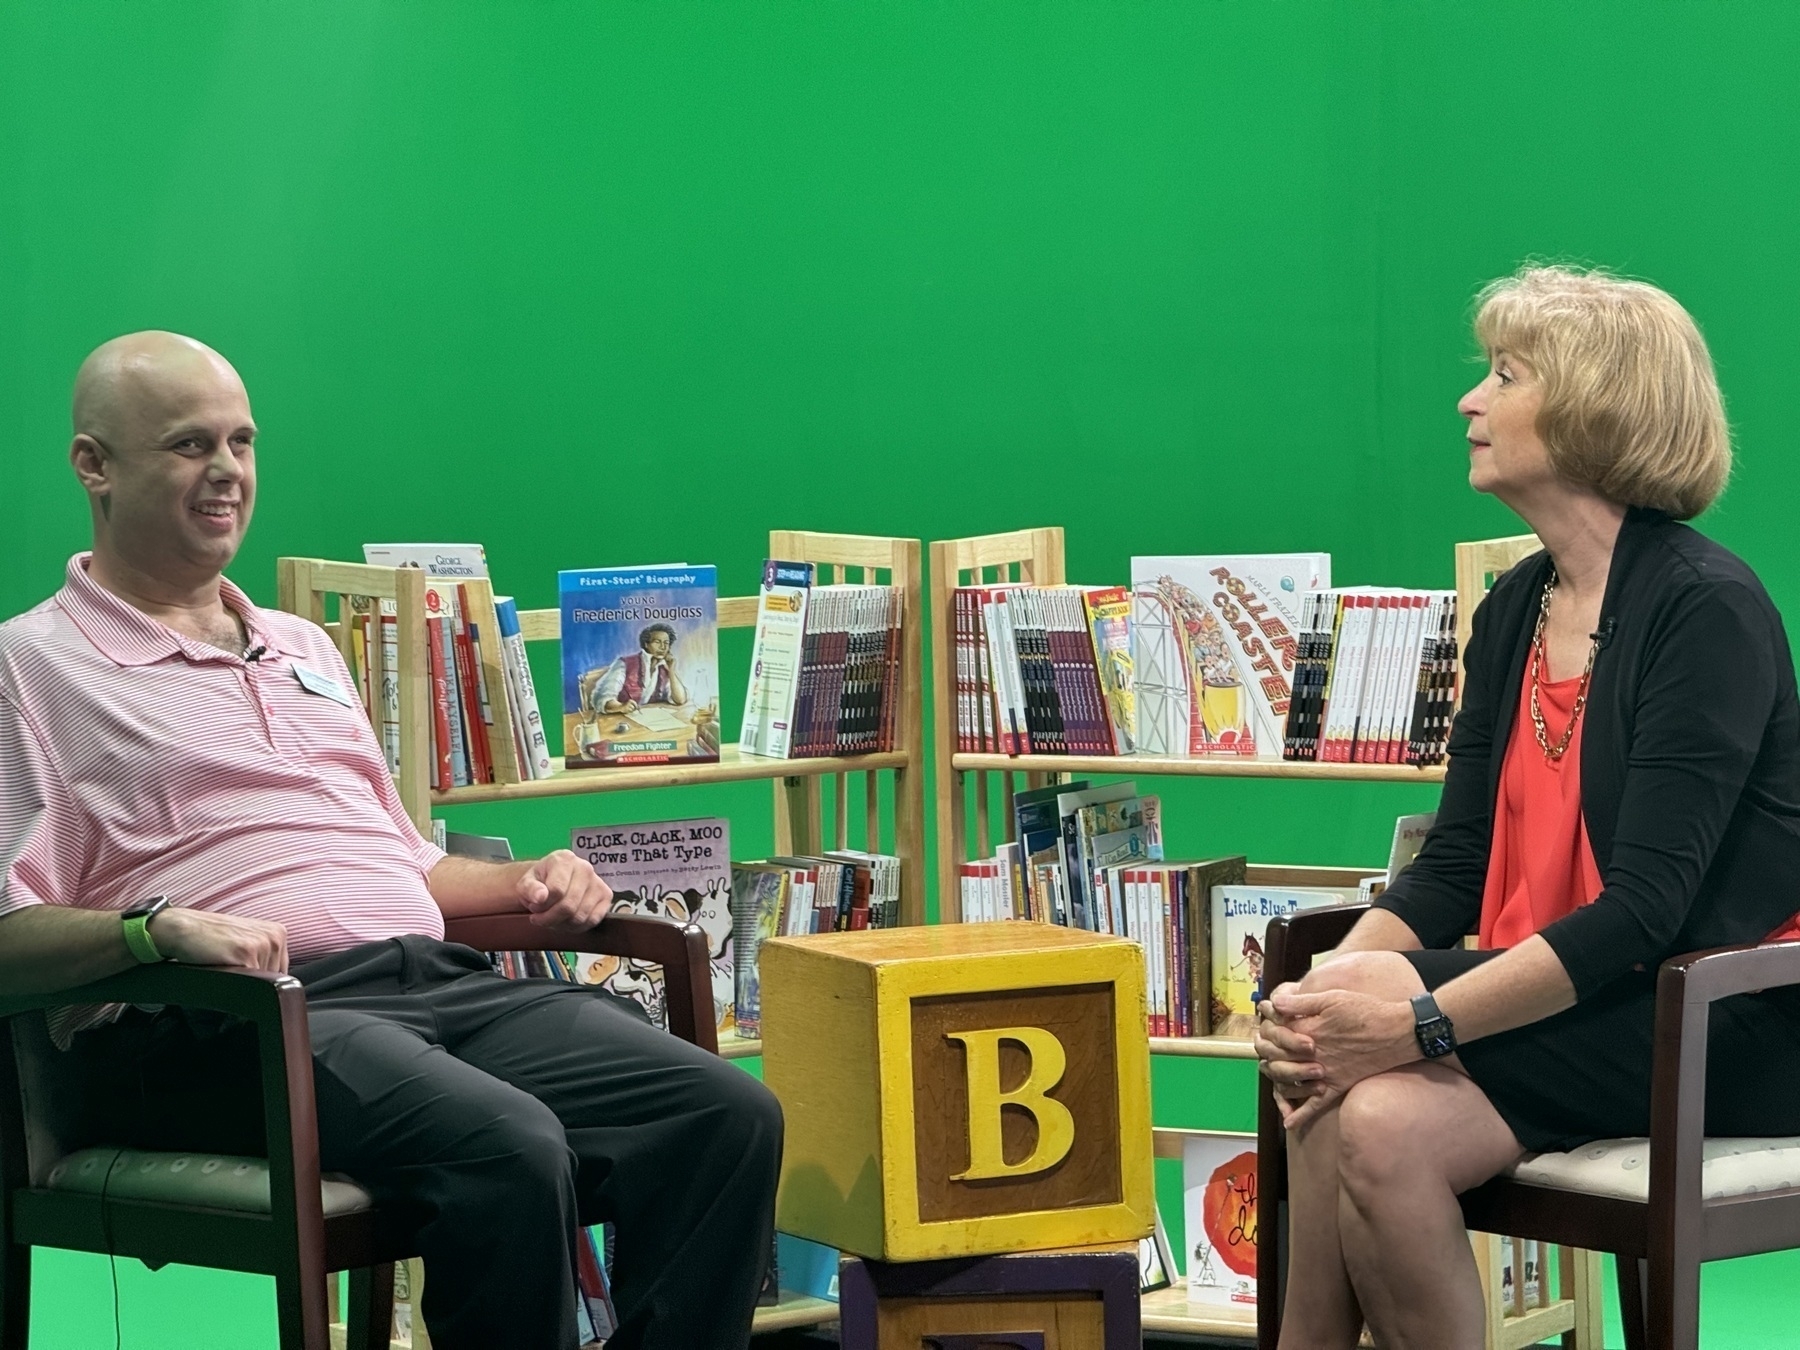 Auto-generated description: Two people are sitting and conversing in front of a green screen with several bookshelves filled with books between them.